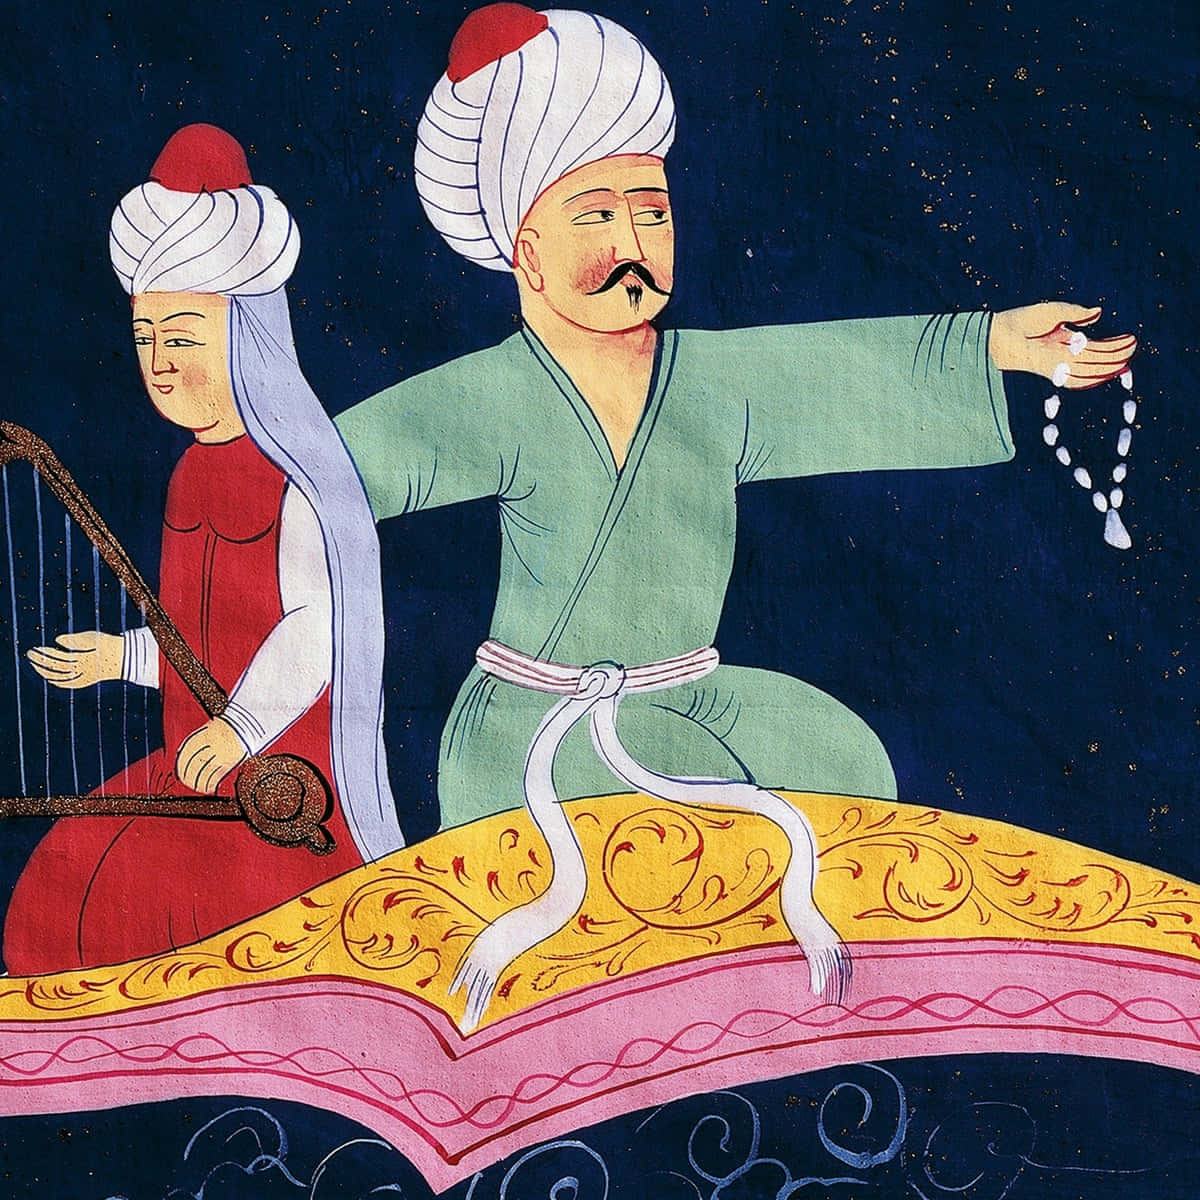 Witness the magical journey of Aladdin with his flying carpet.